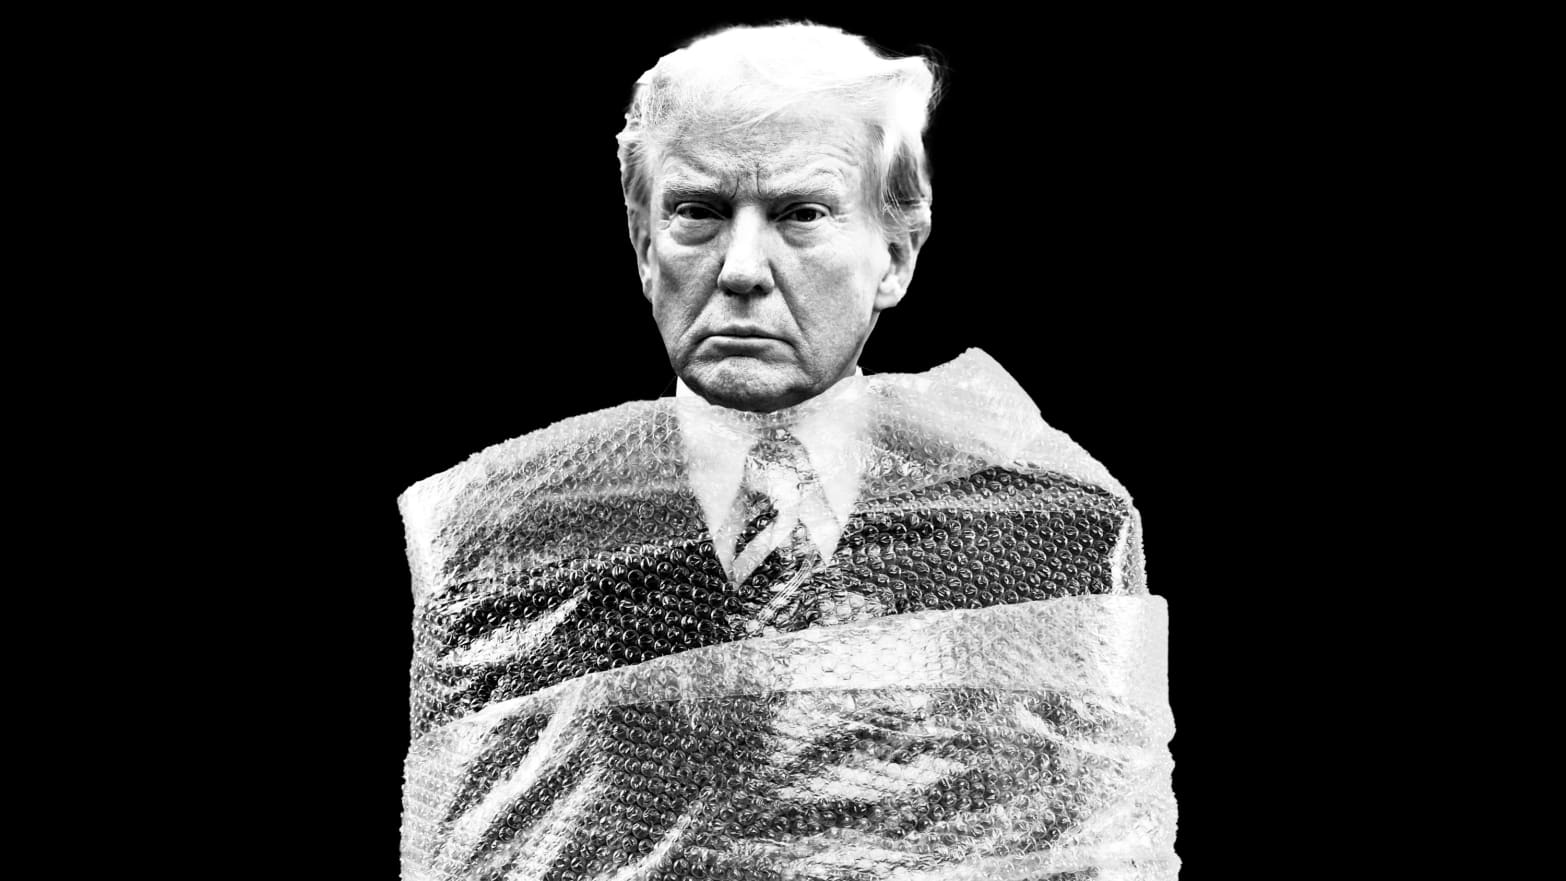 Photo illustration of Donald Trump wrapped in bubble wrap on a black background